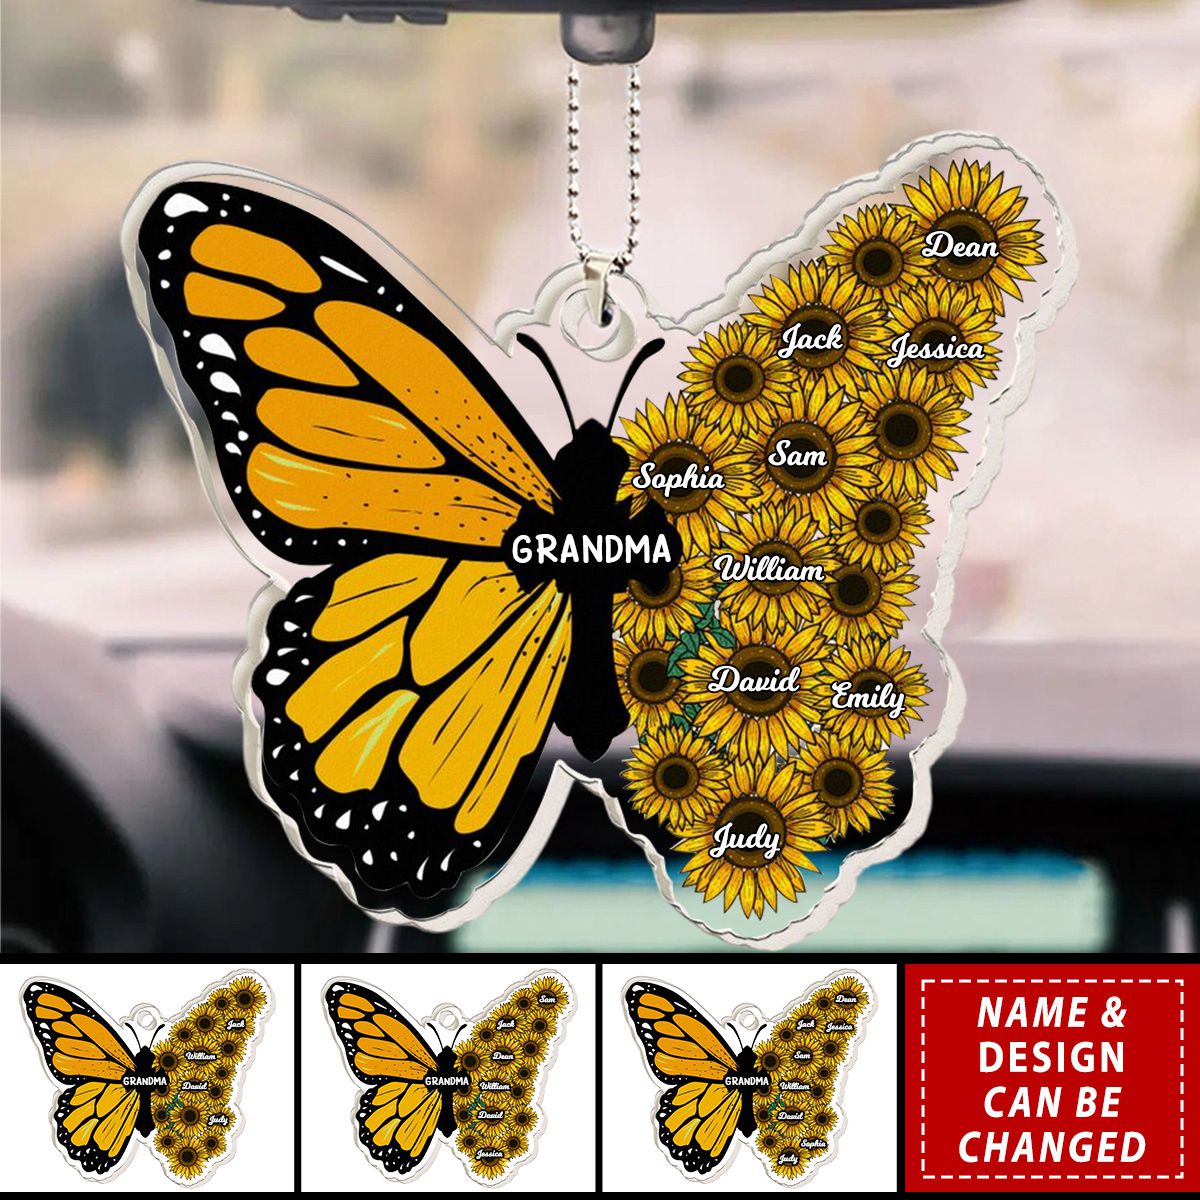 Grandma - Butterfly And Sunflower - Personalized Car Ornament